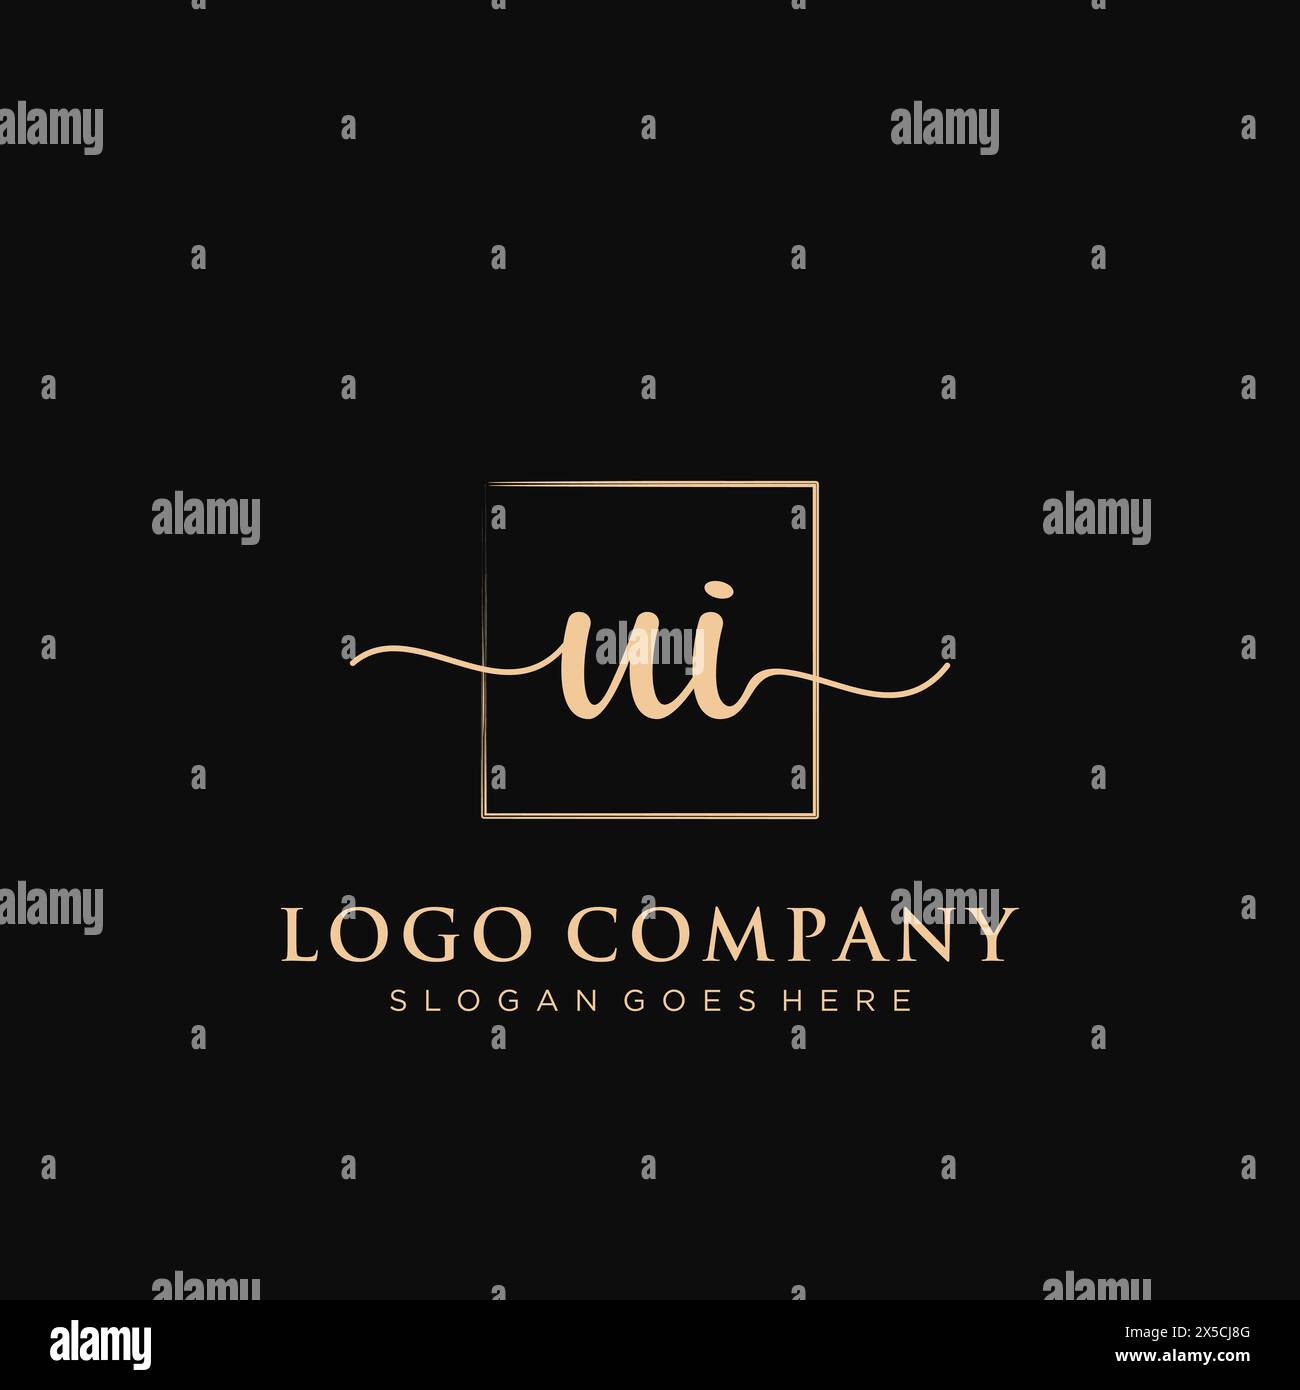 UI Initial handwriting logo with rectangle Stock Vector